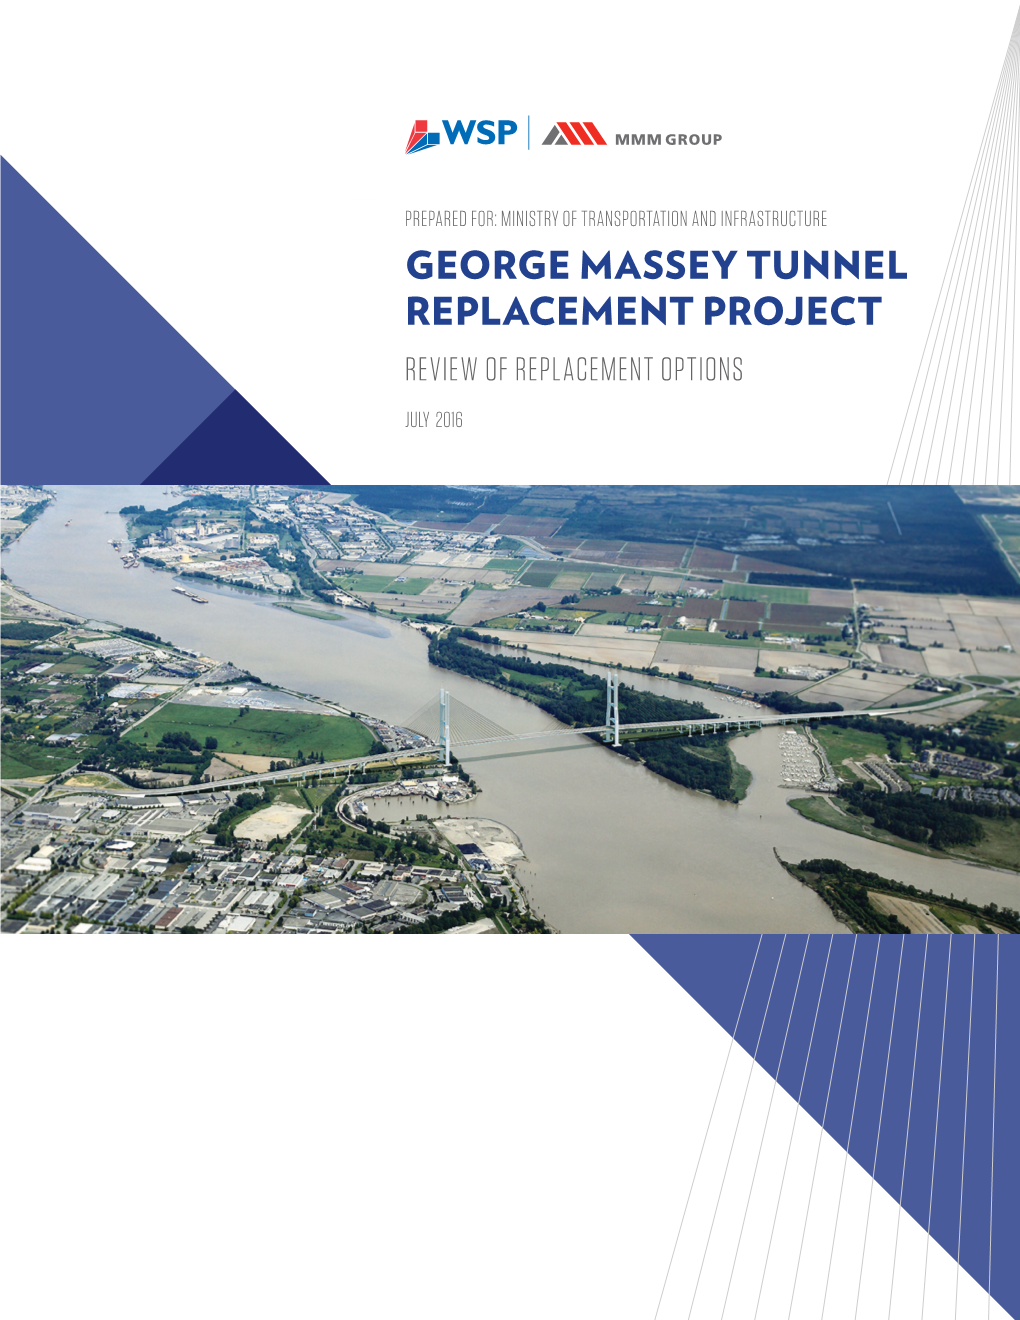 George Massey Tunnel Replacement Project Review of Replacement Options